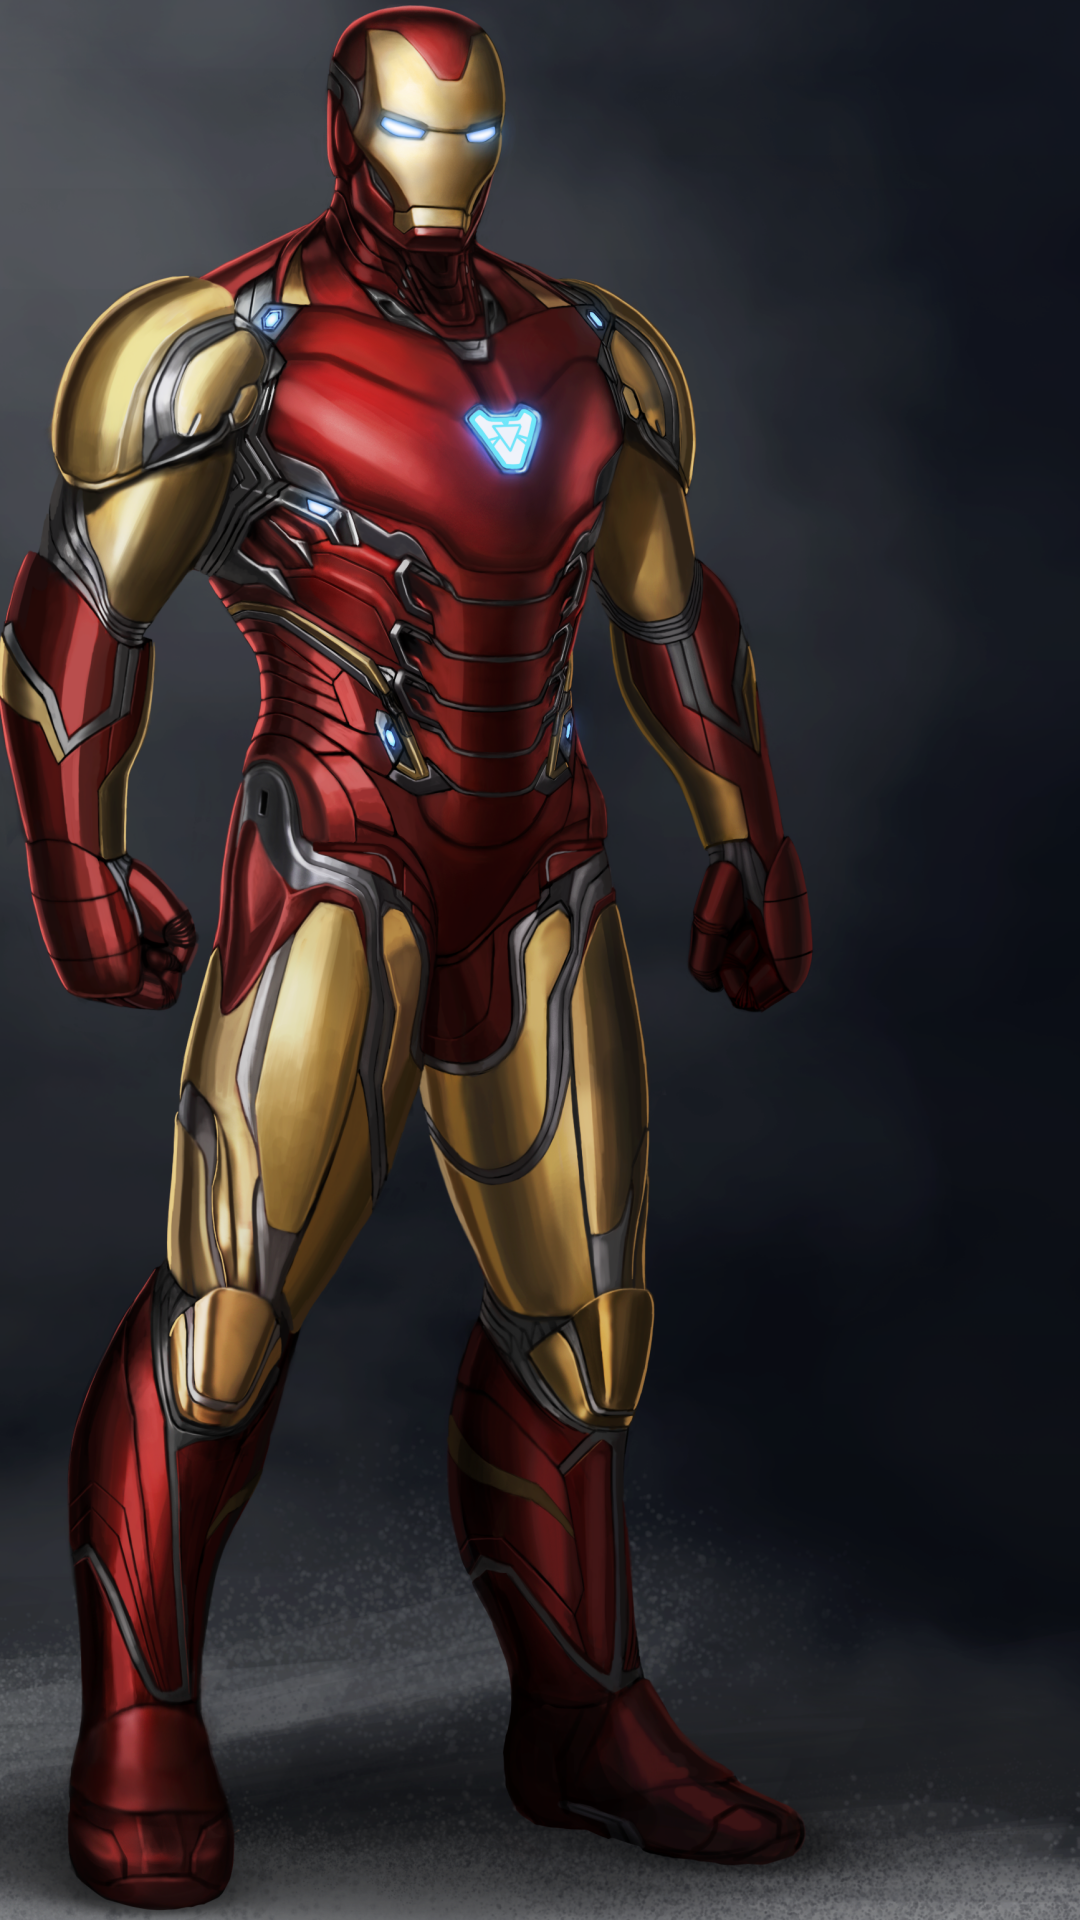 Iron Man Endgame Suit Android Wallpapers - Wallpaper Cave